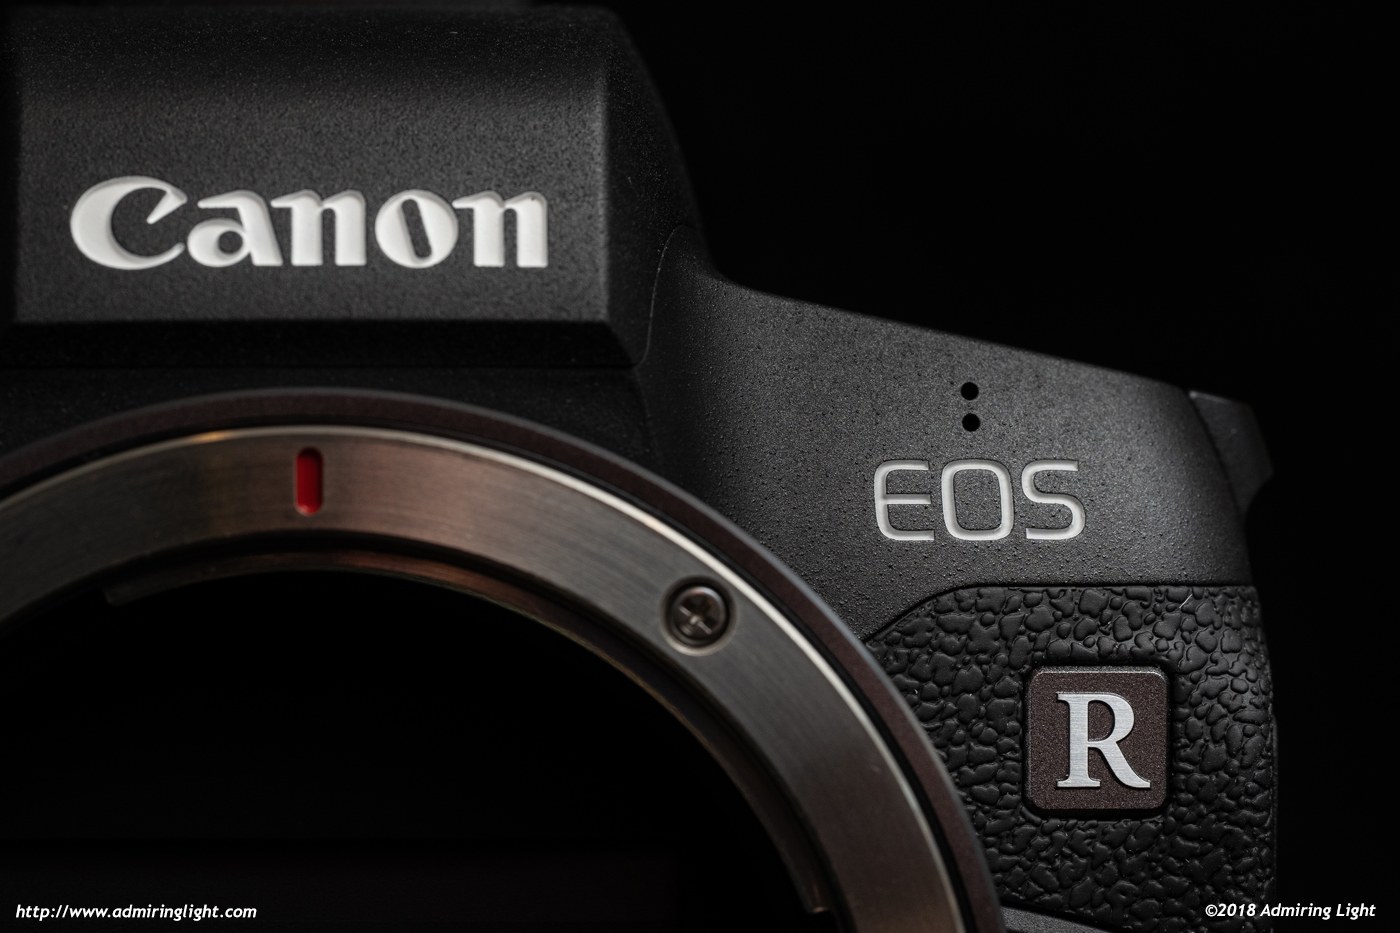 Review: Canon EOS R - Page 5 of 5 - Admiring Light